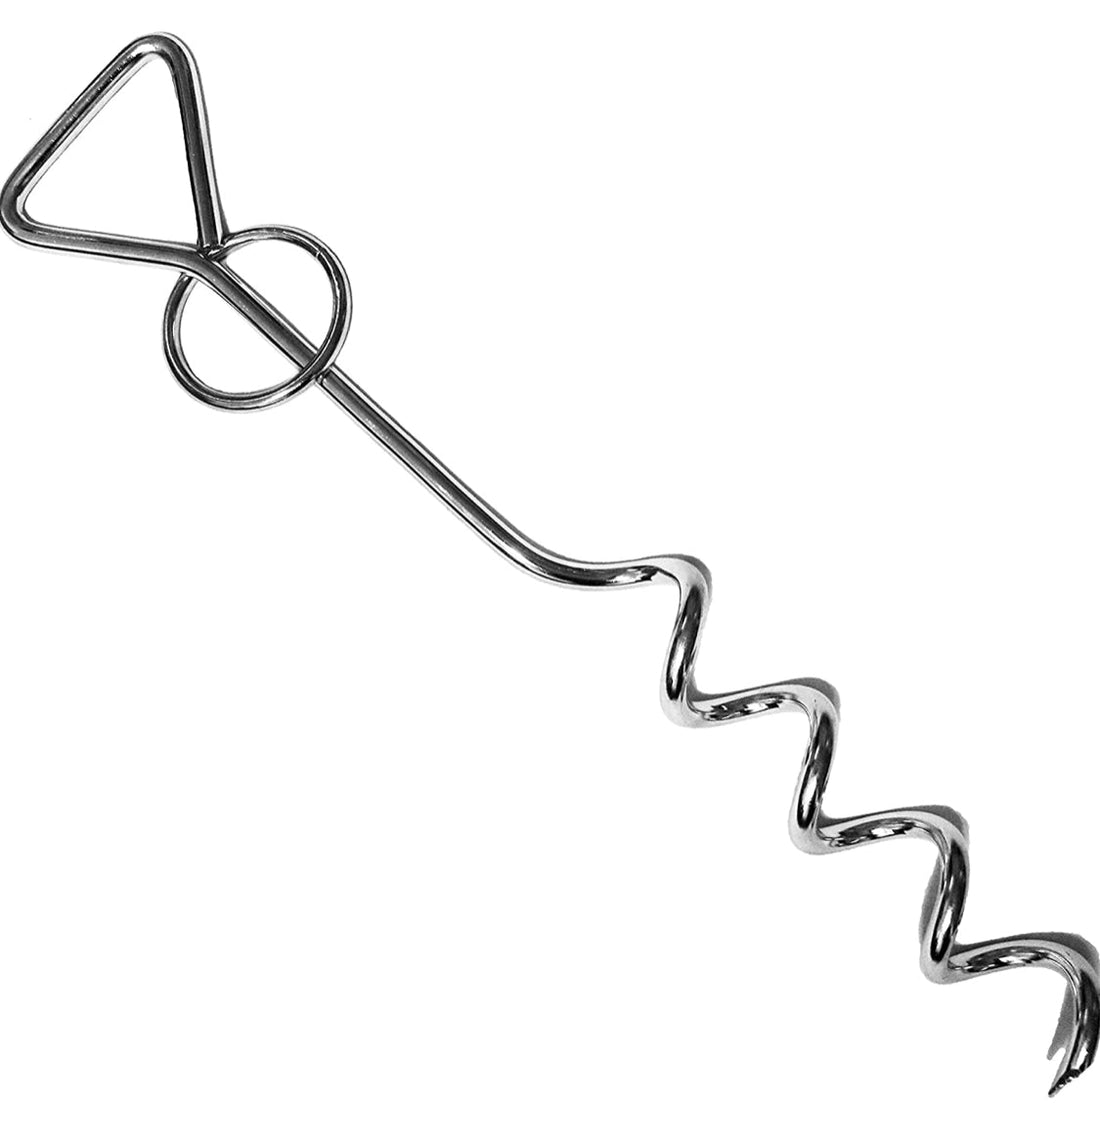 The Best Dog Tie Out Stake - Don't Let Dogs Get Tangled On Dog Stakes With Small Parts NextClimb